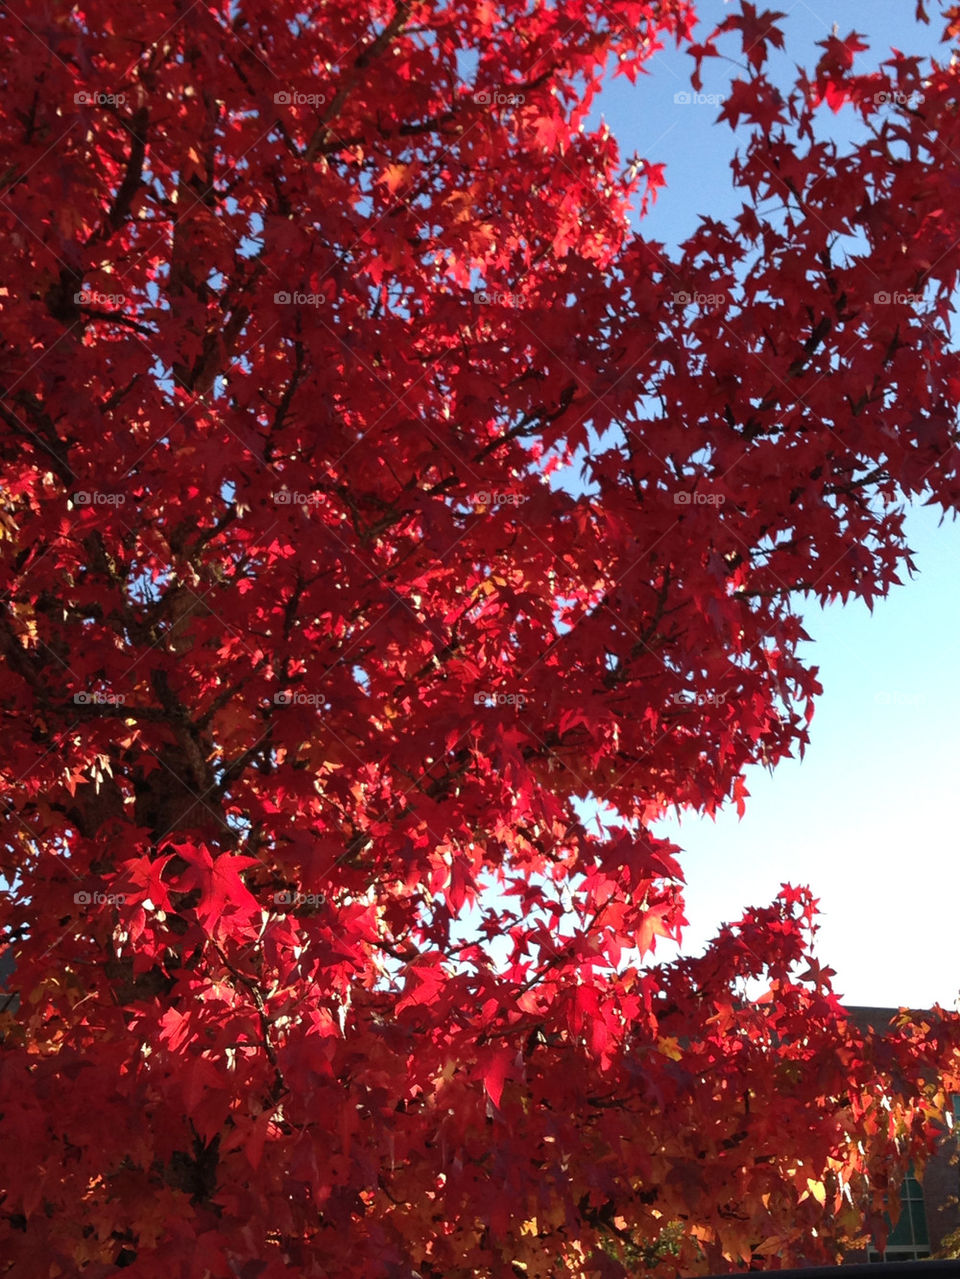 The sun helps the red tree glow